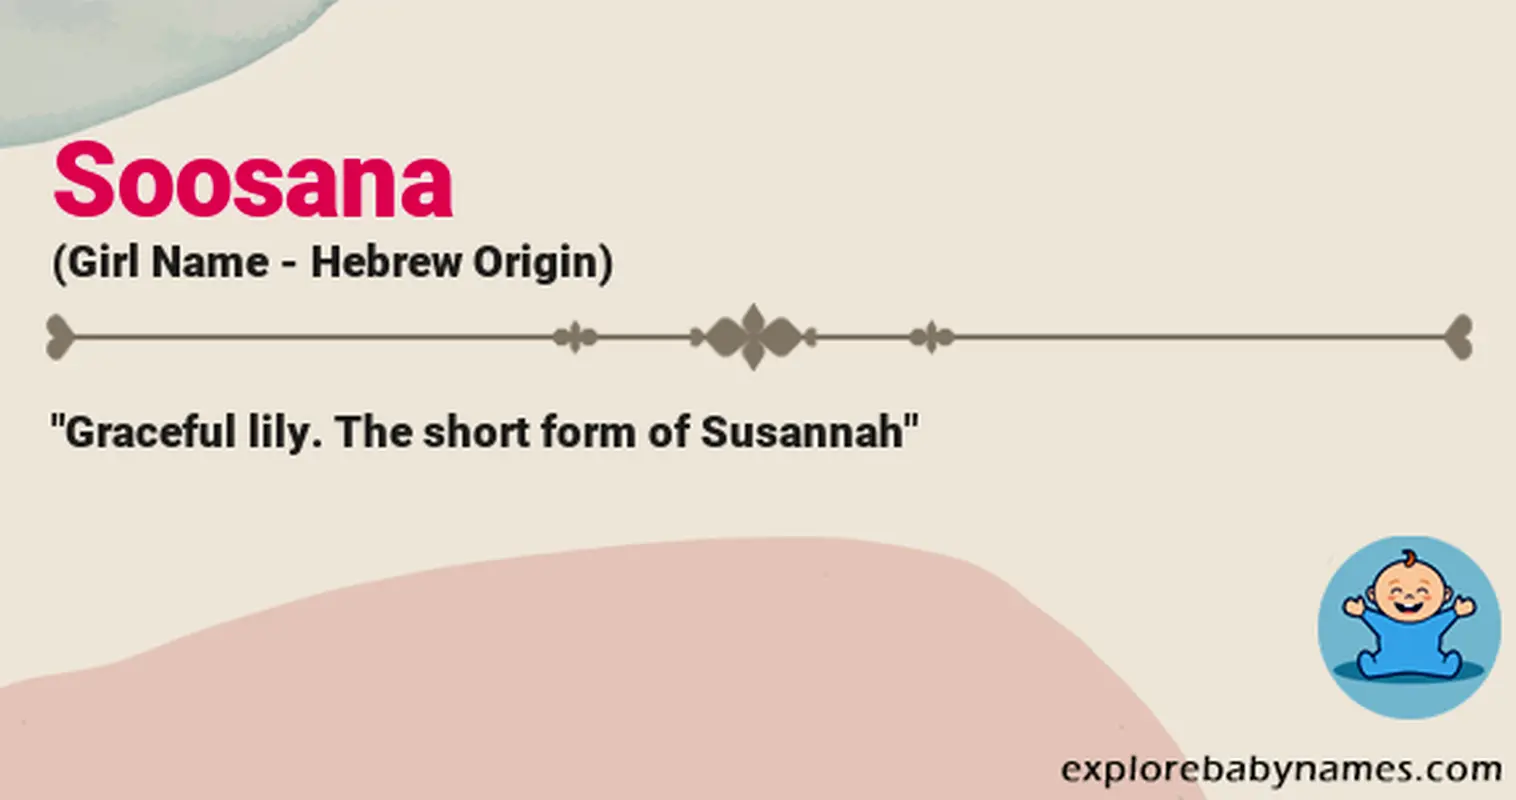 Meaning of Soosana